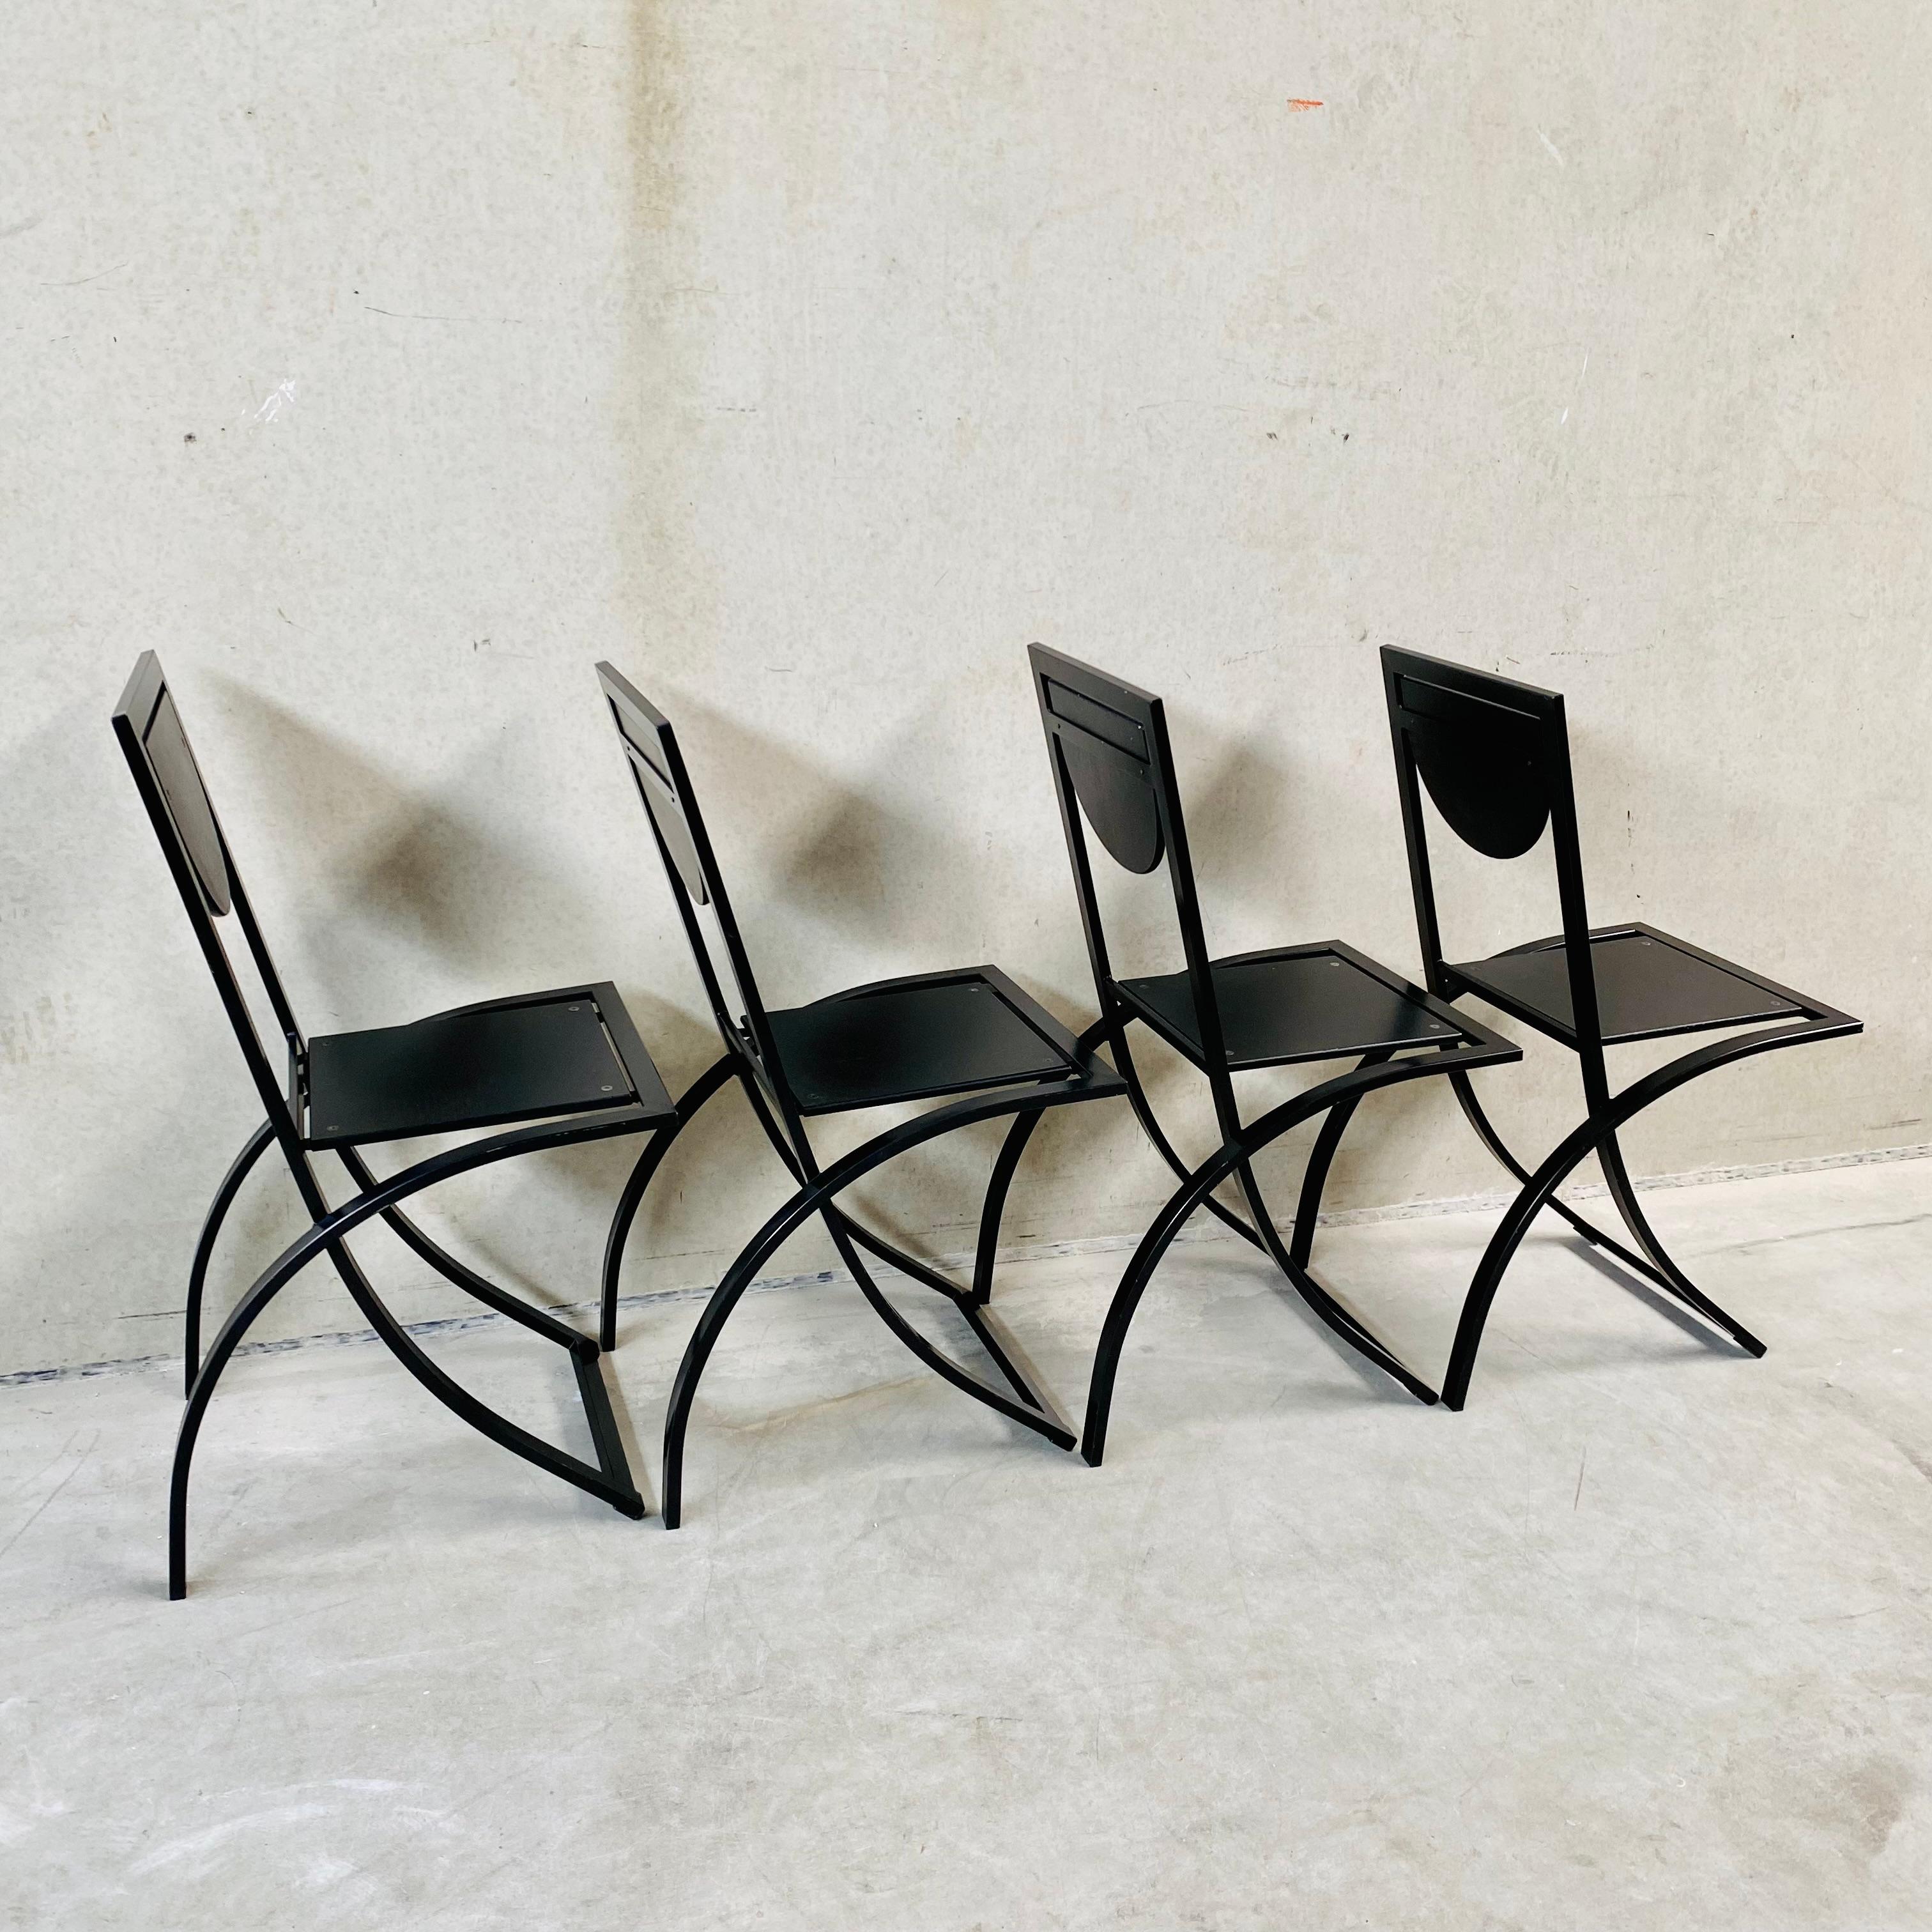 Late 20th Century 4 x KFF Black Smoked Oak Dining Chairs by Karl Friedrich Förster 1980 For Sale